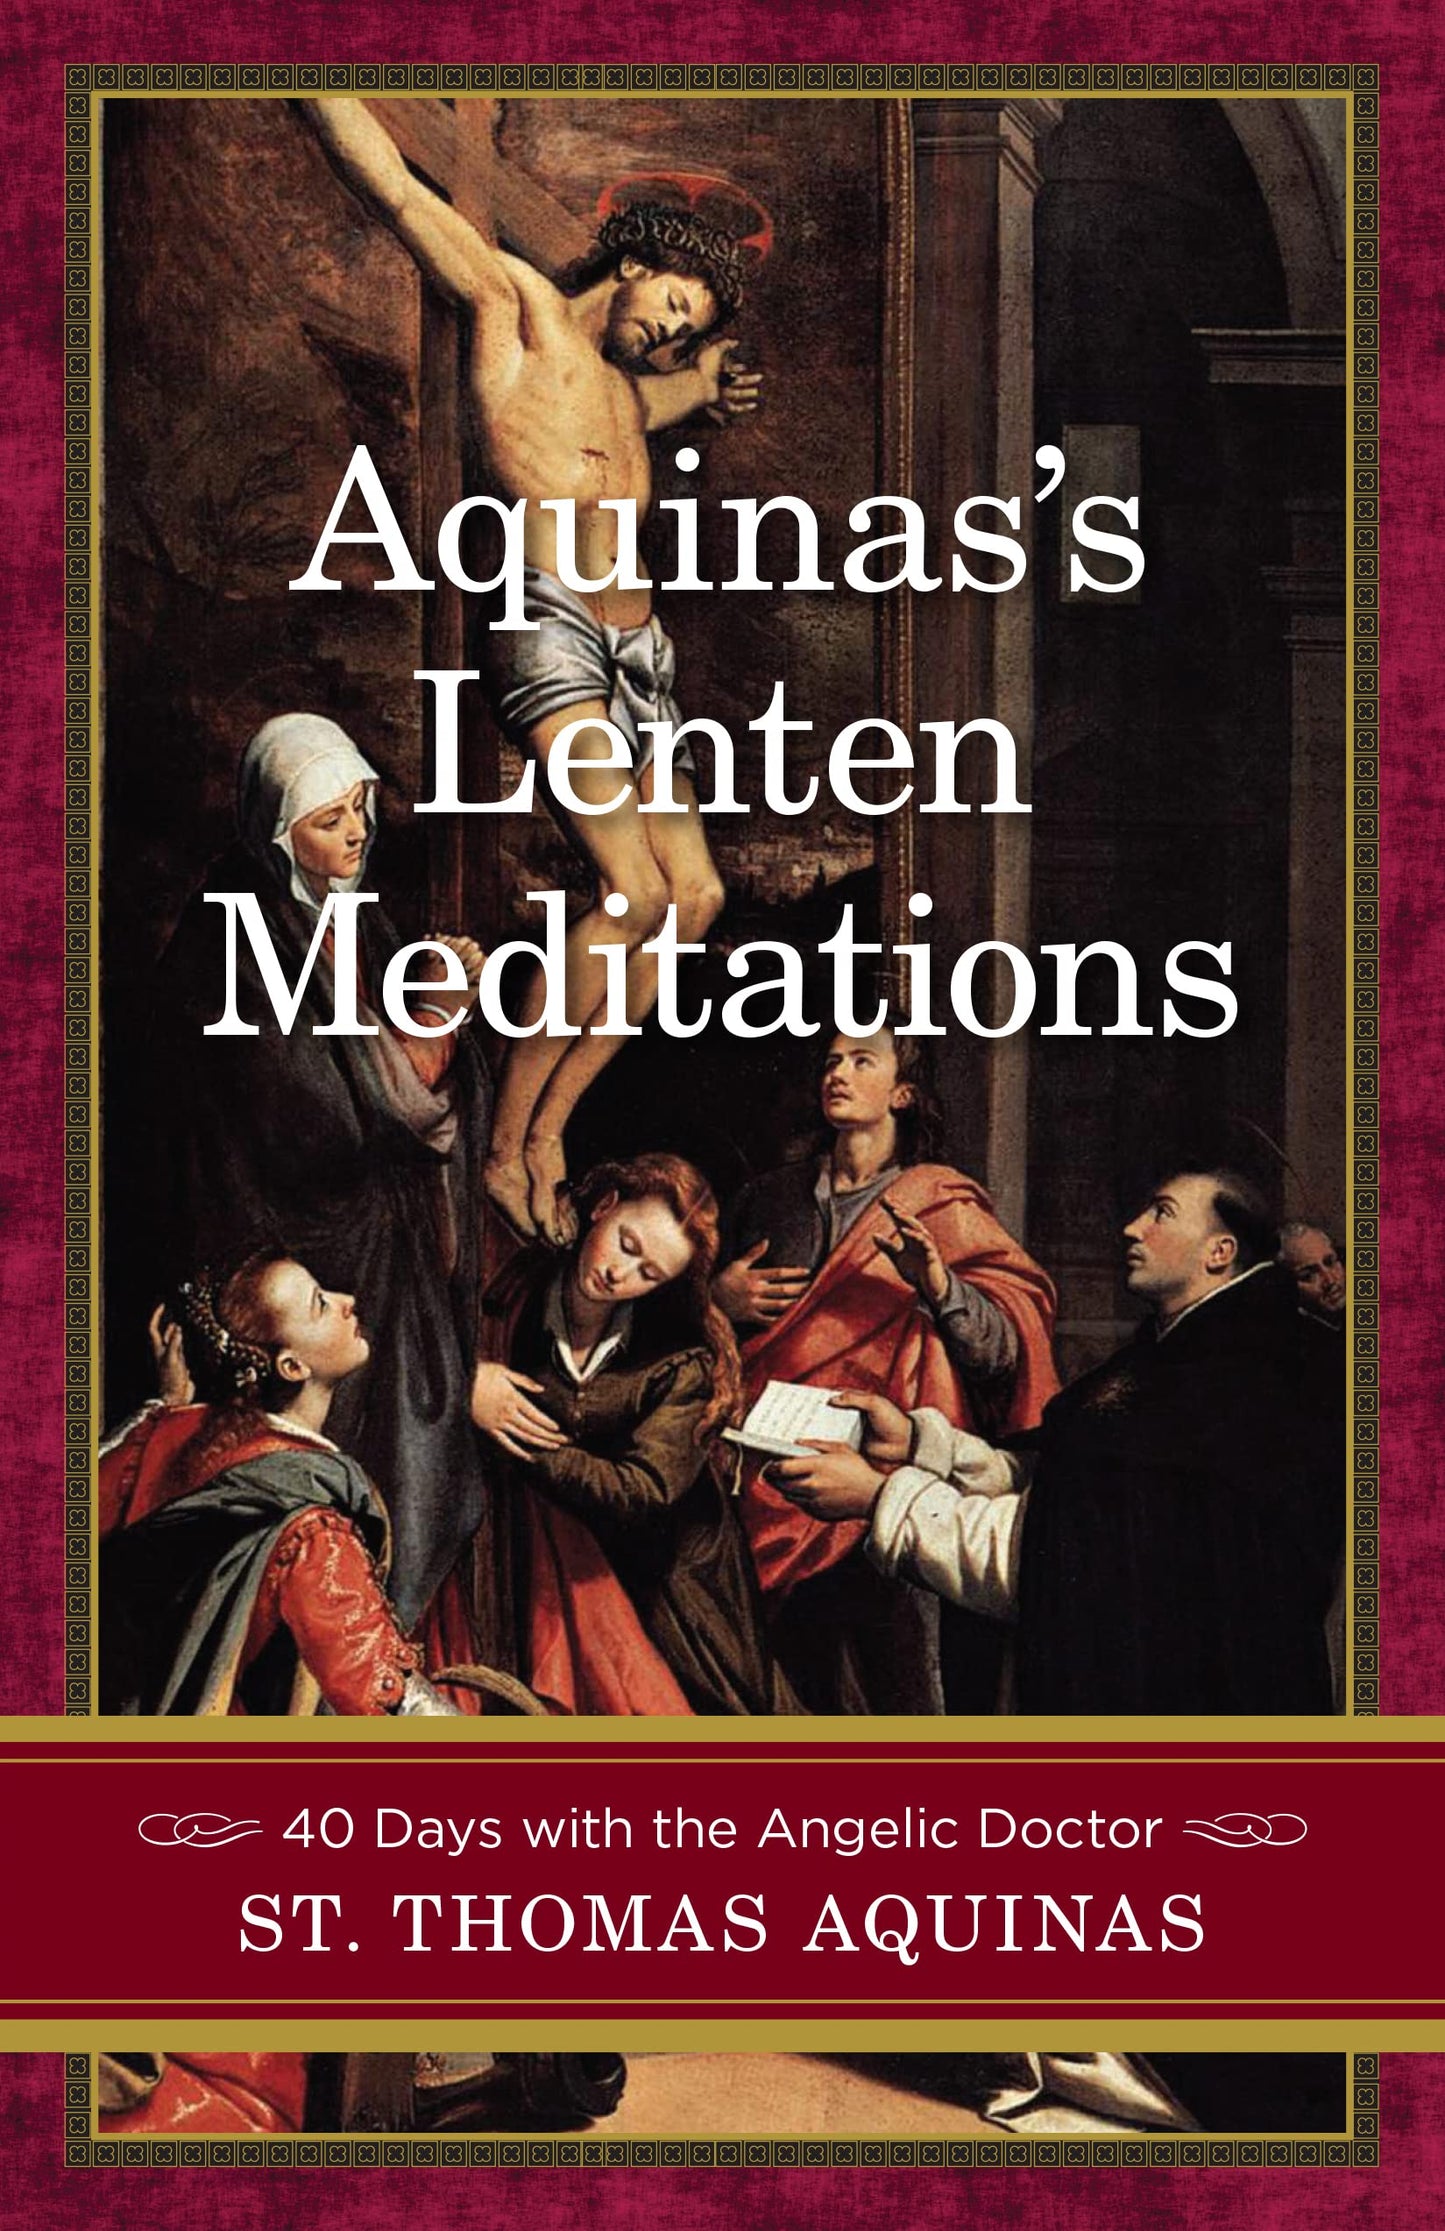 Aquinas's Lenten Meditations 40 Days with the Angelic Doctor St. Thomas Aquinas